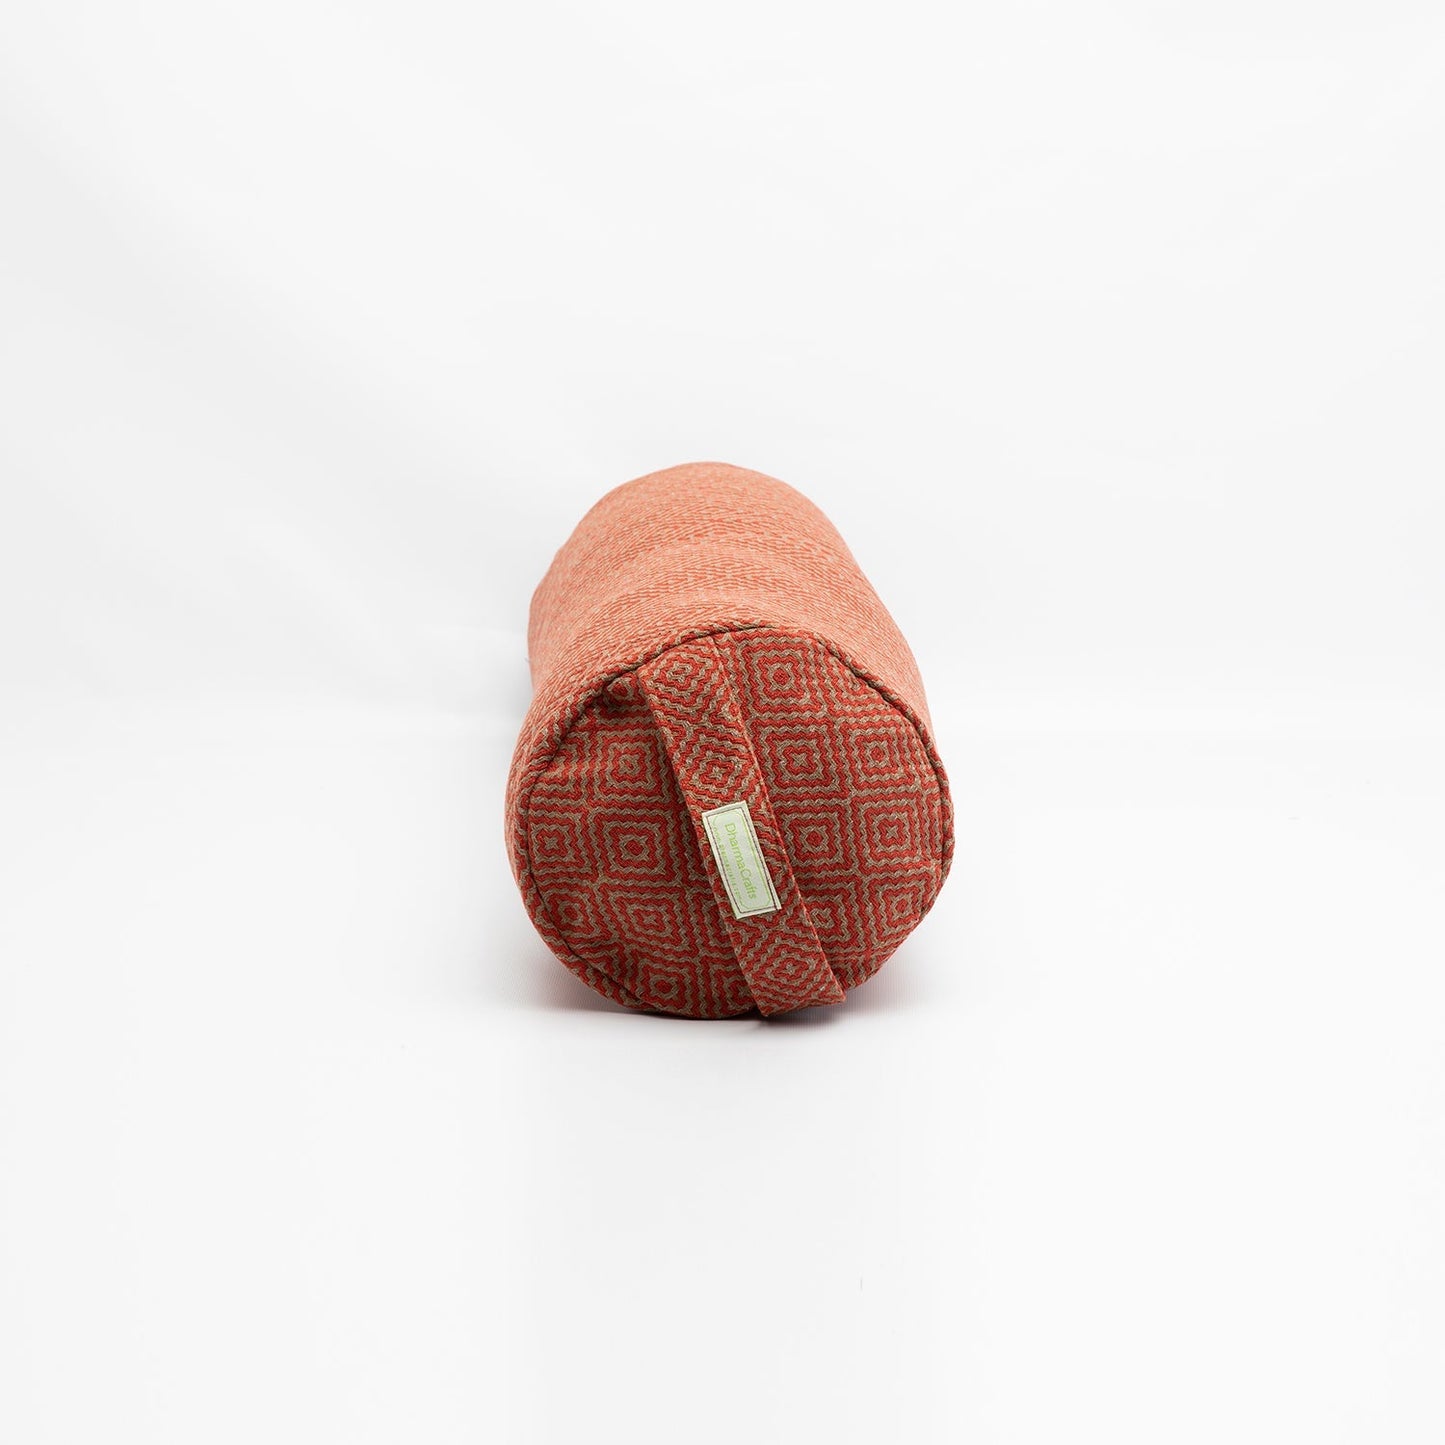 Geometric Bolster - COVER ONLY